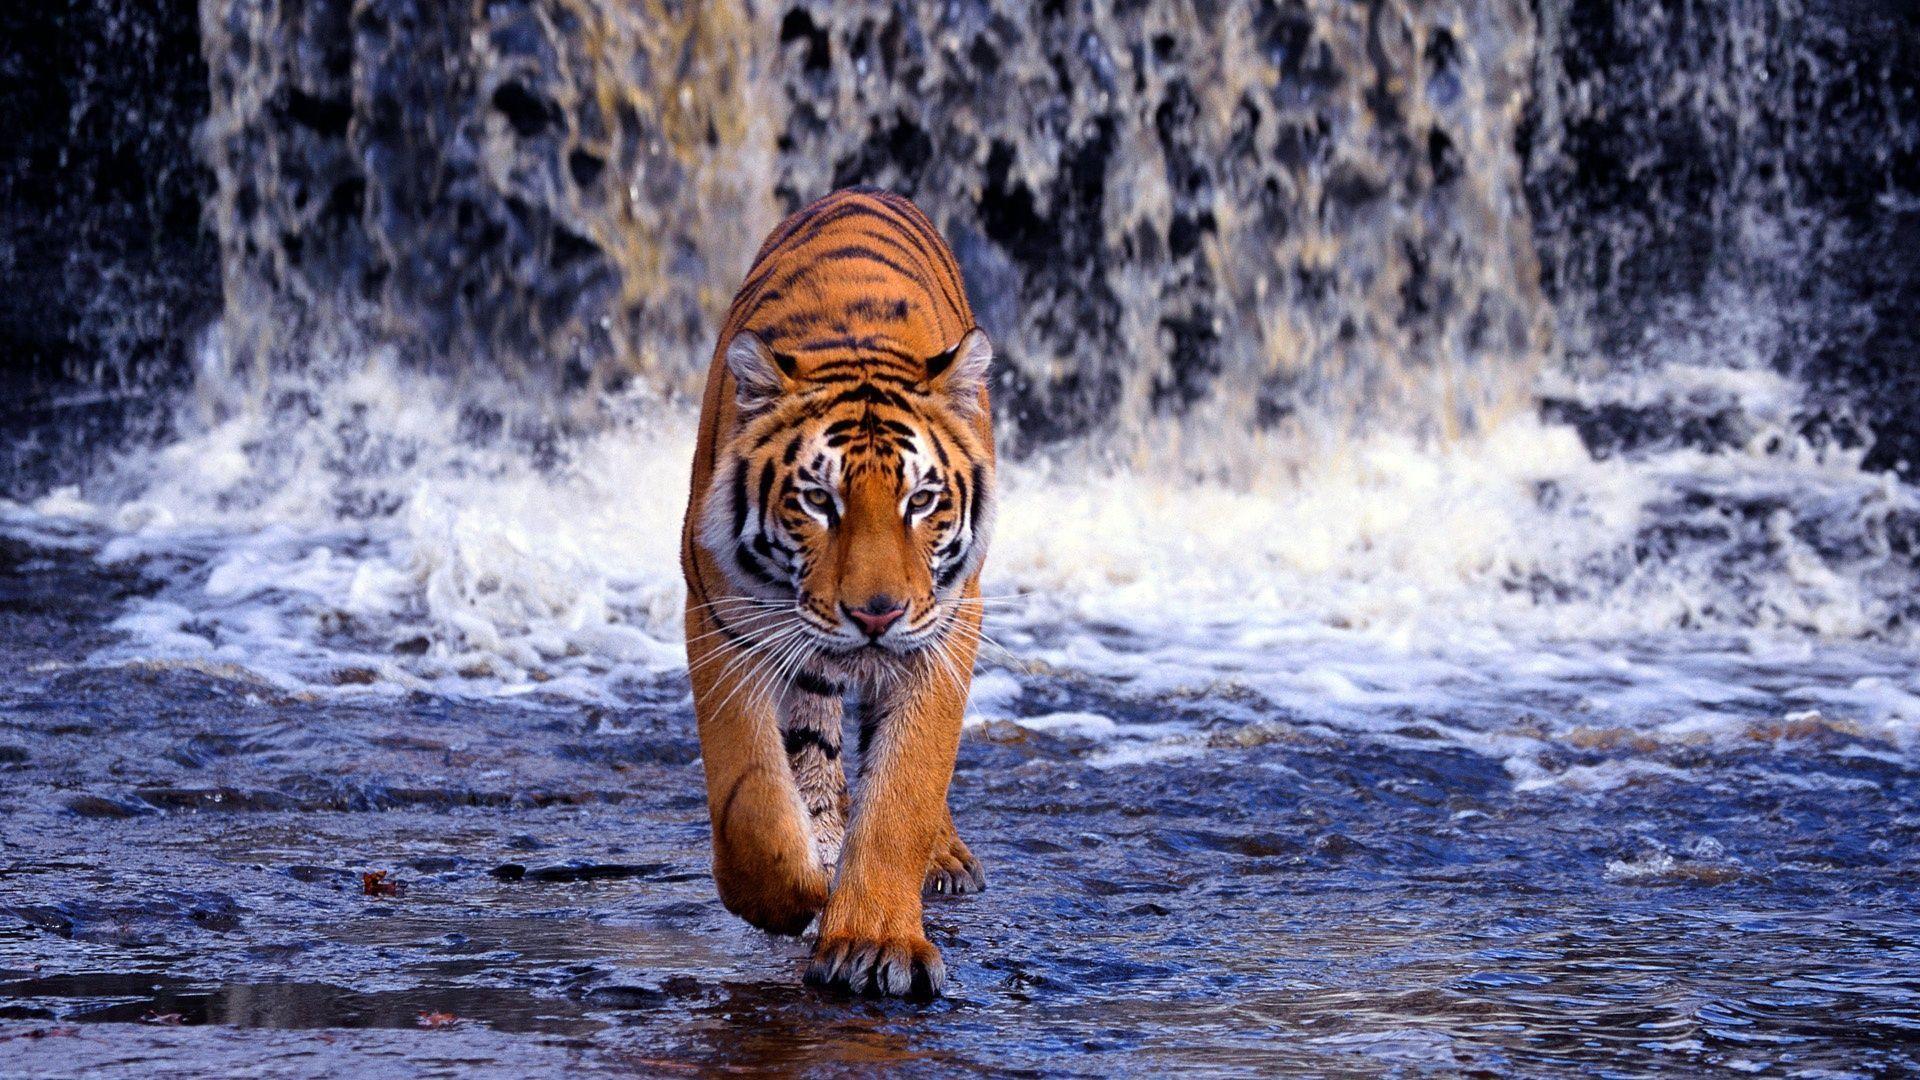 Animals For > Tiger Wallpapers Hd